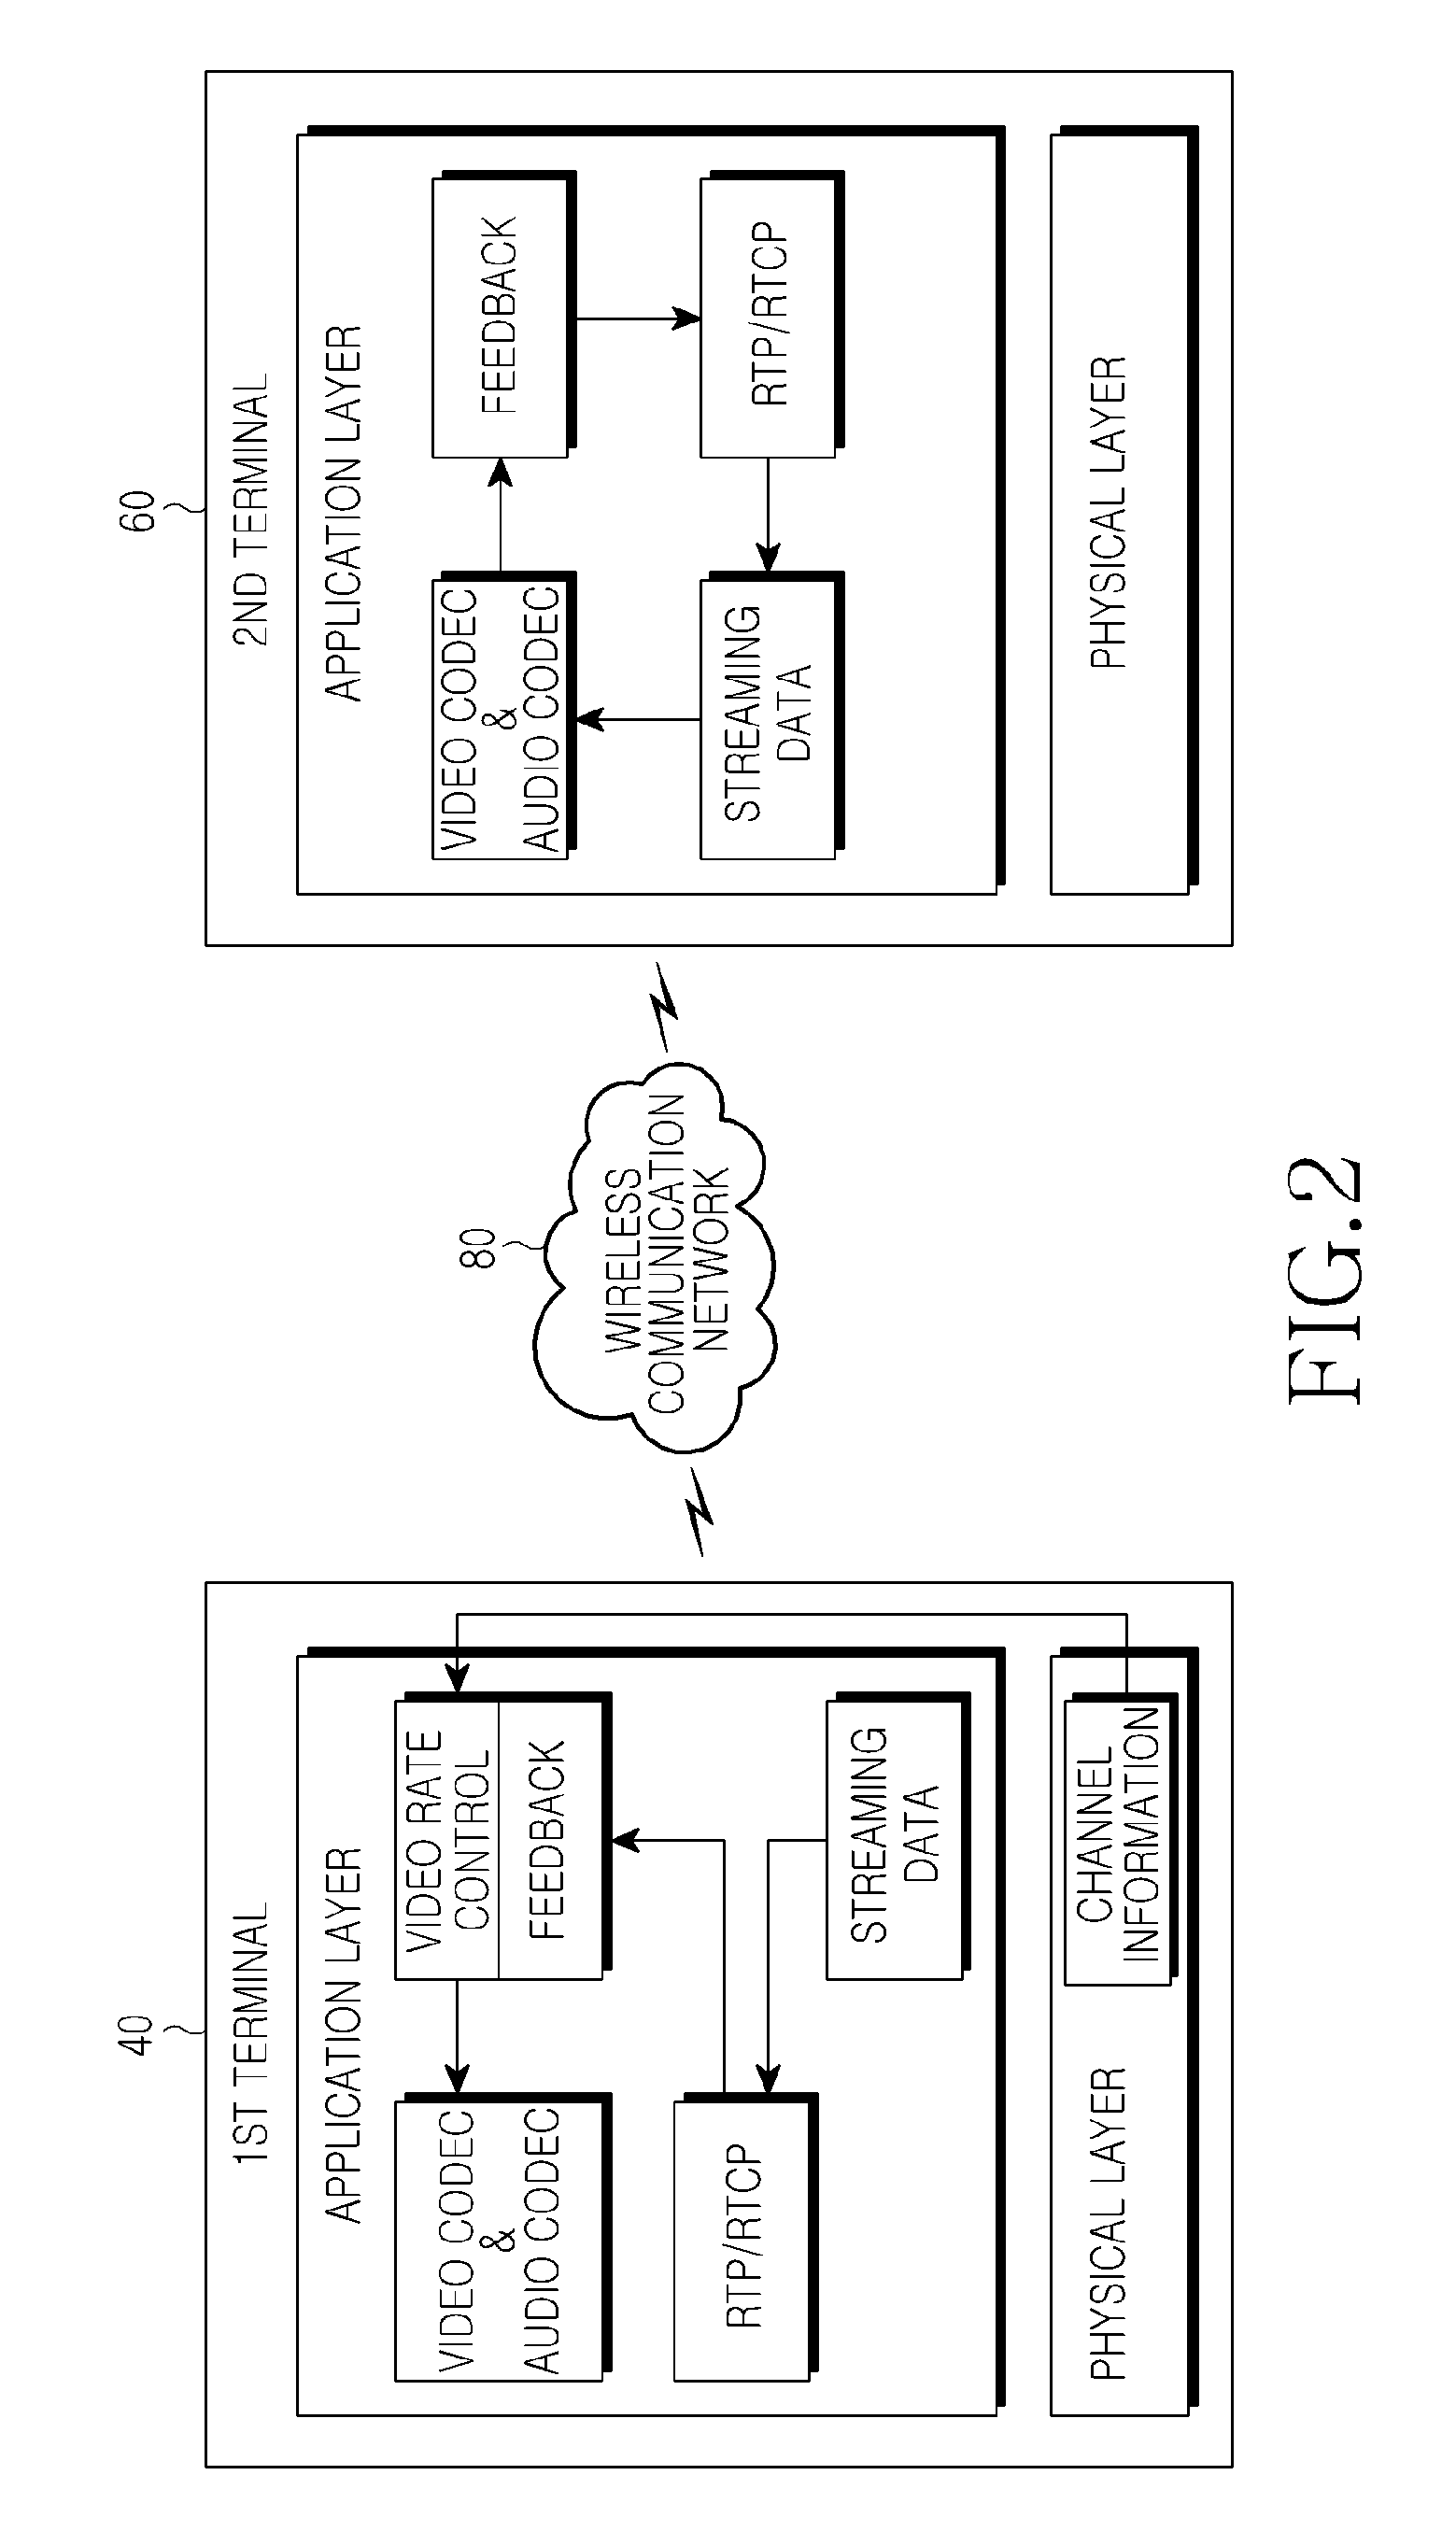 Apparatus and method for transmitting and receiving data in a wireless communication network